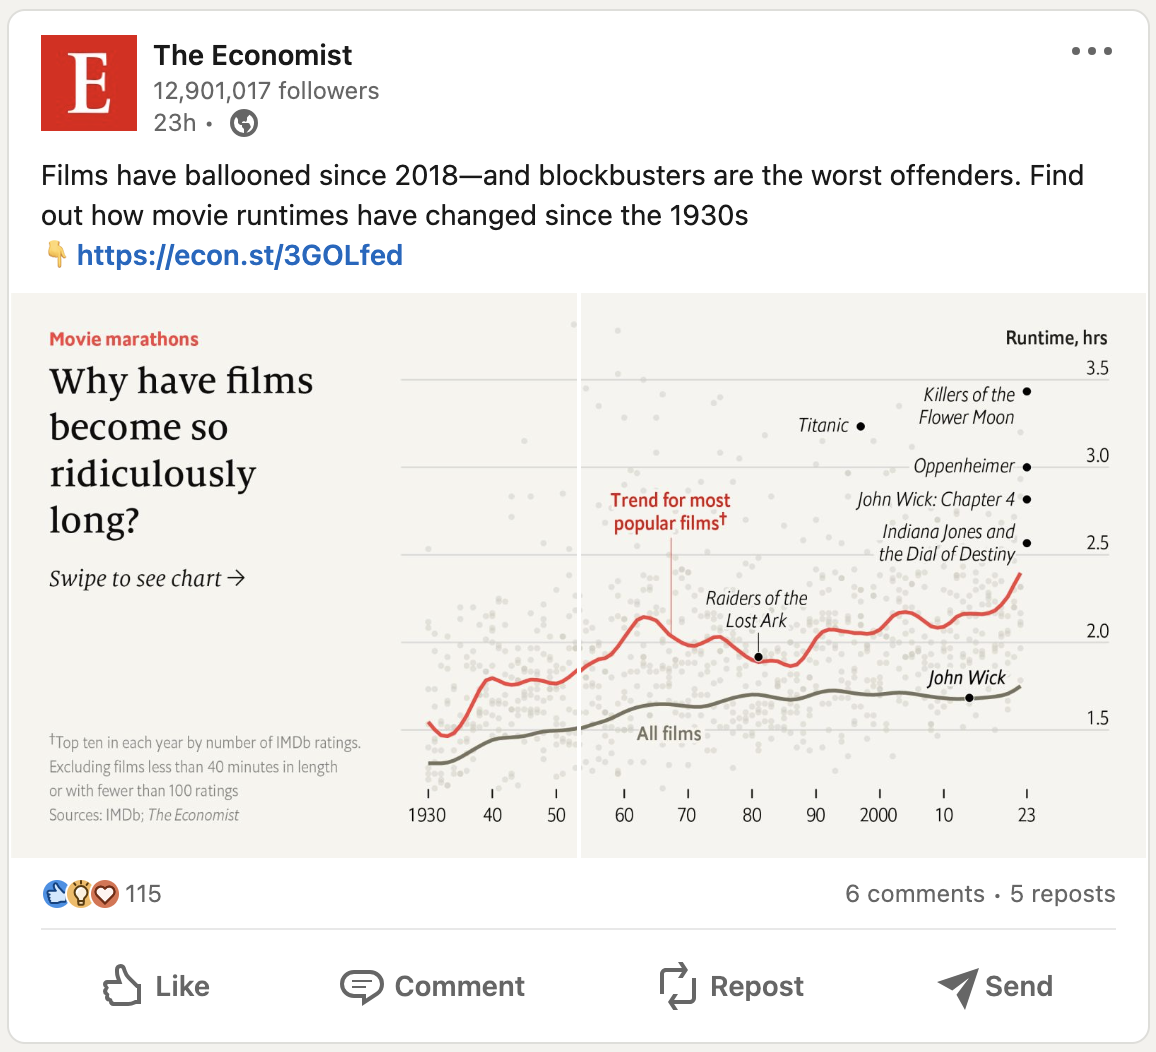 A screenshot of a LinkedIn post from The Economist